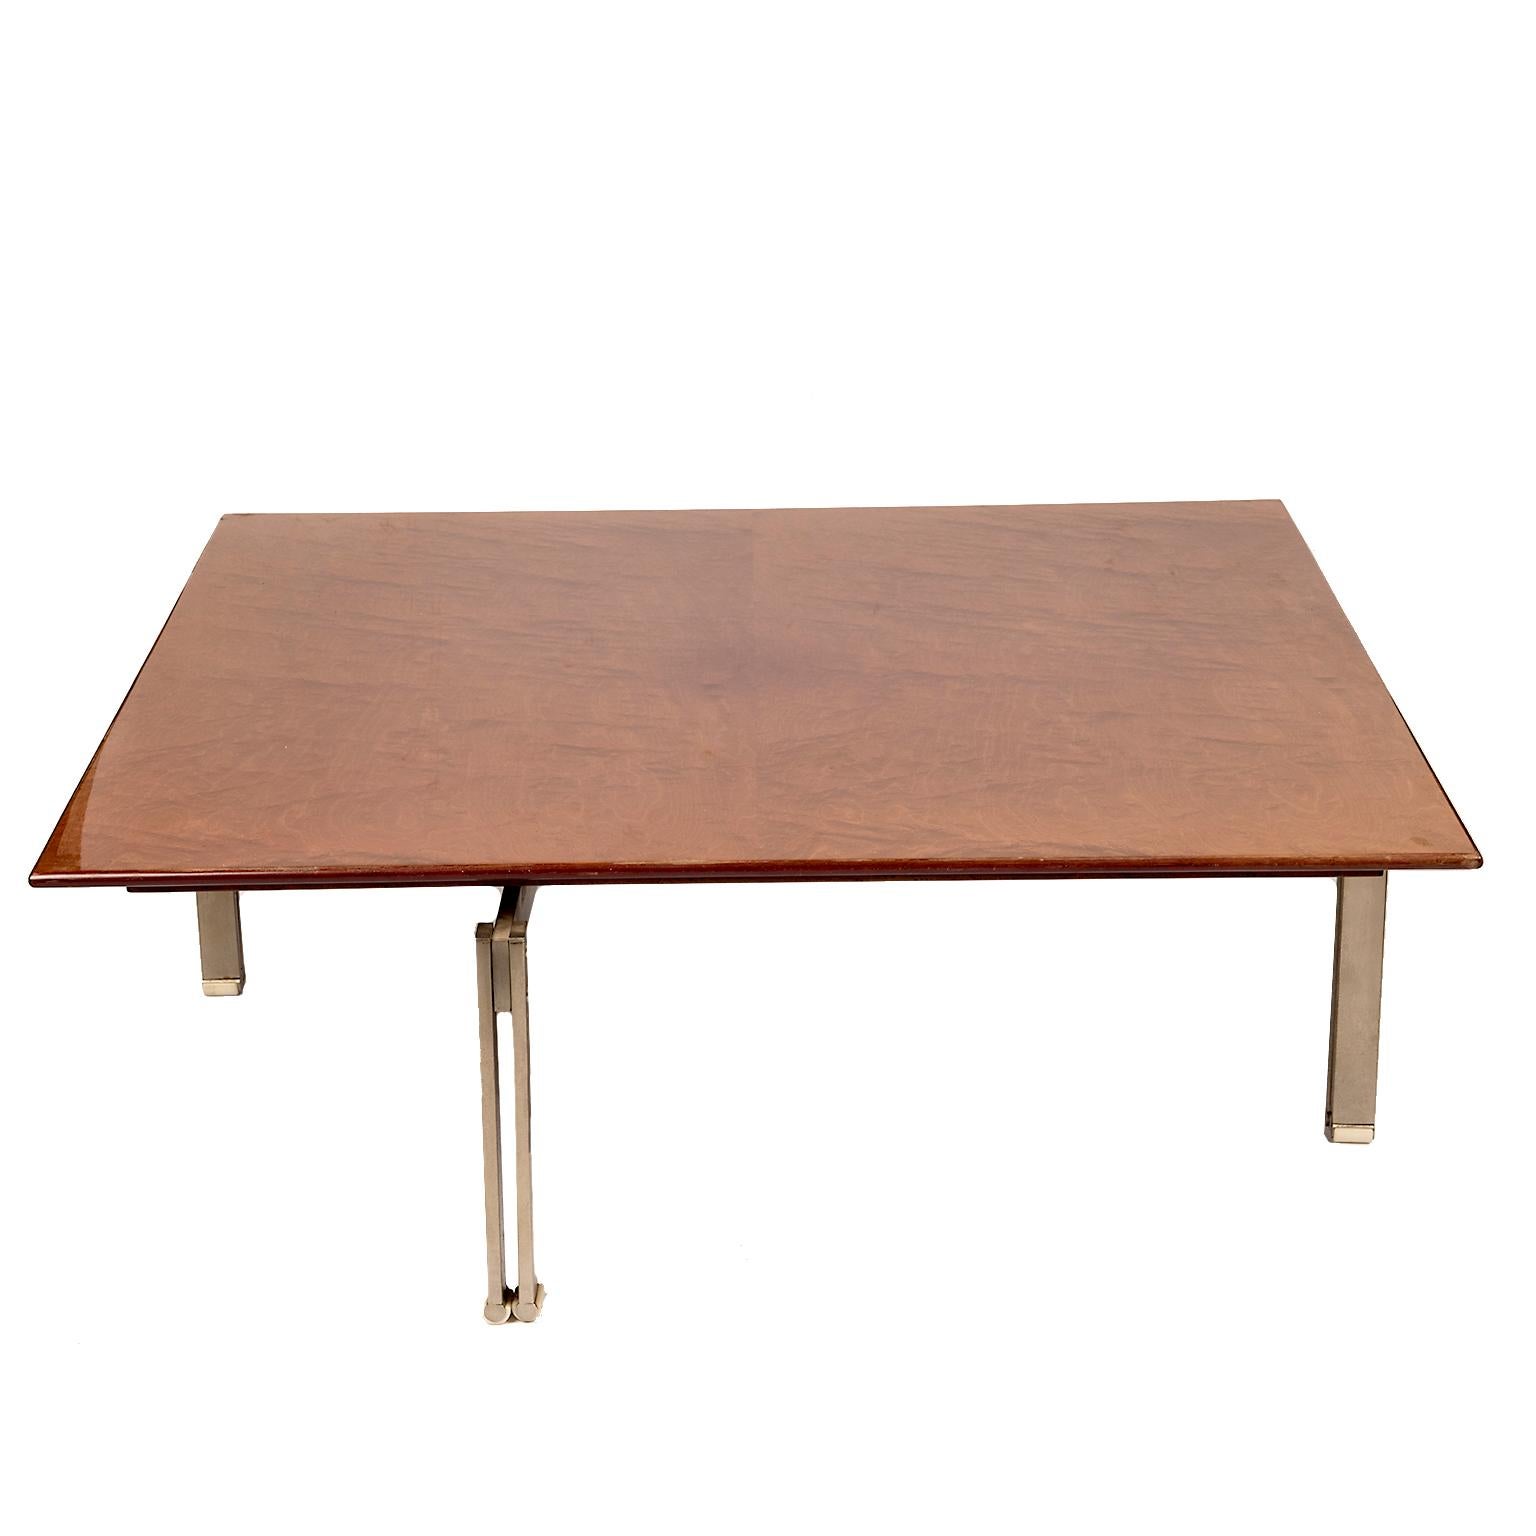 A gorgeous lacquered figured wood table with stainless brushed steel base.
Two available at time of listing.